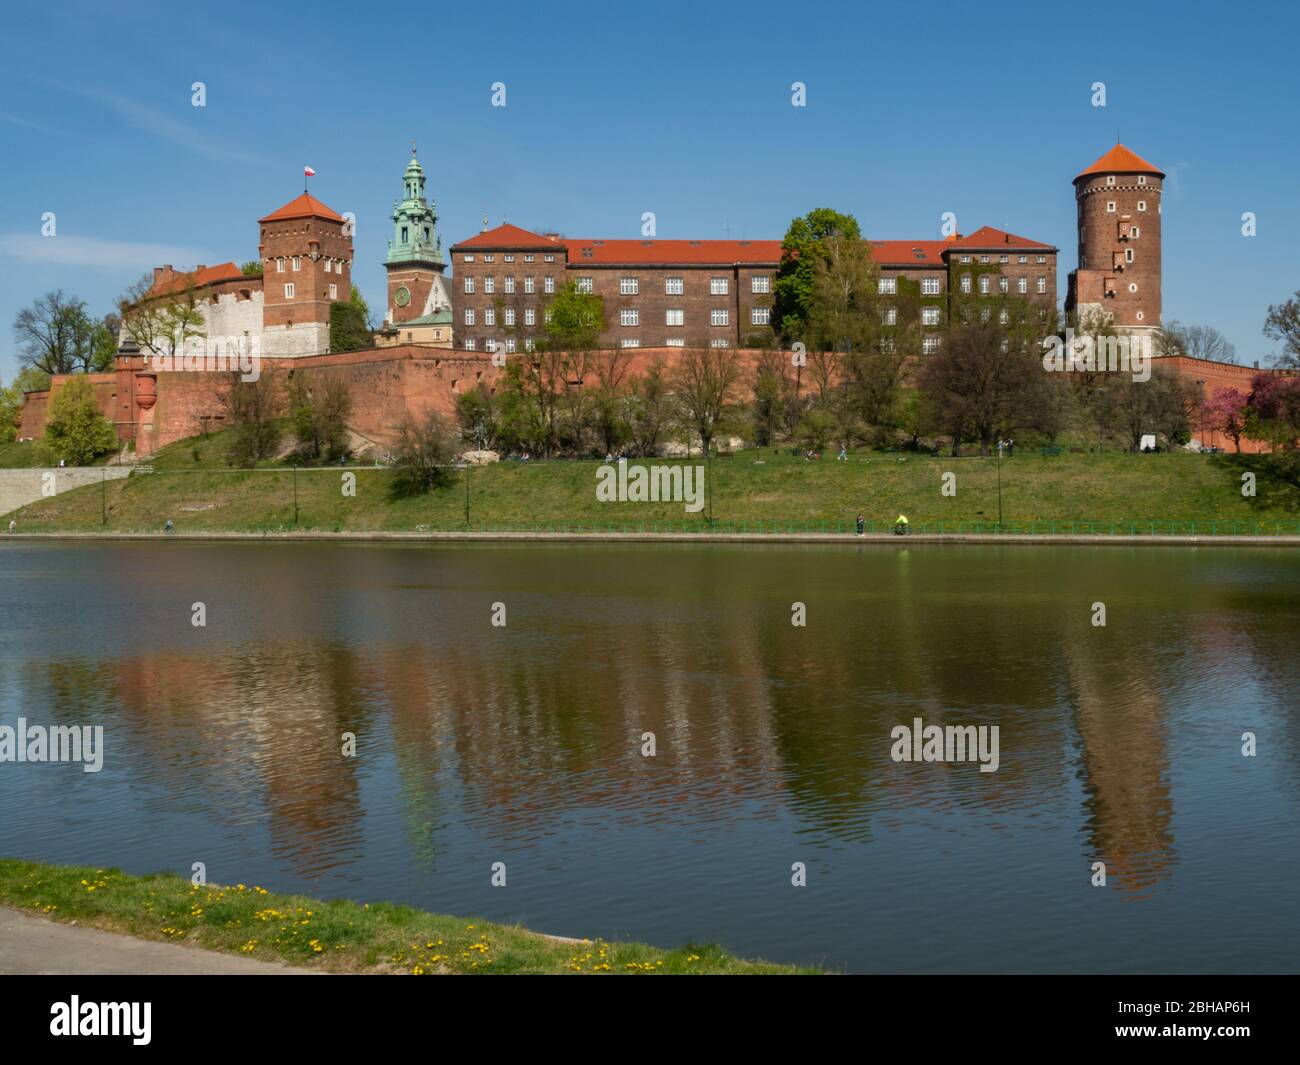 The former Royal residence of Polish monarchy, Wawel Castle, Krakow, Poland. Spring time, view from the Vistula river boulevard. Stock Photo